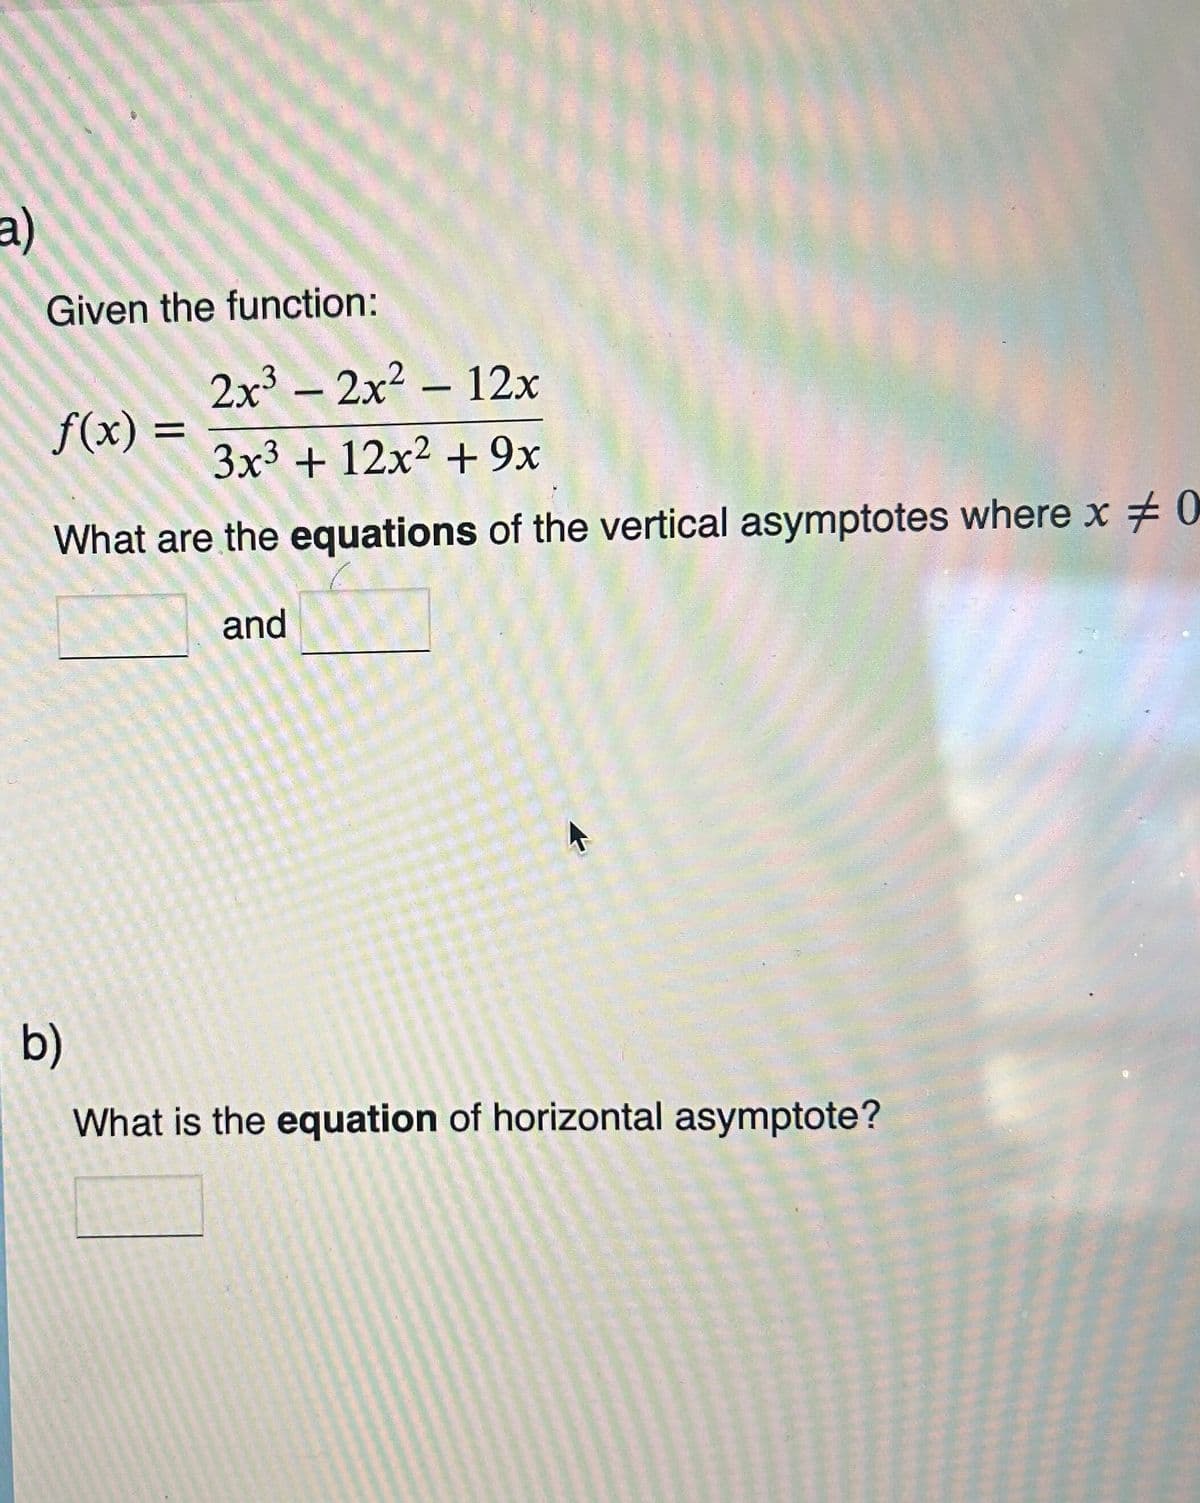 a)
Given the function:
2x³ - 2x² - 12x
3x³ + 12x² + 9x
What are the equations of the vertical asymptotes where x 0
and
f(x) =
b)
What is the equation of horizontal asymptote?